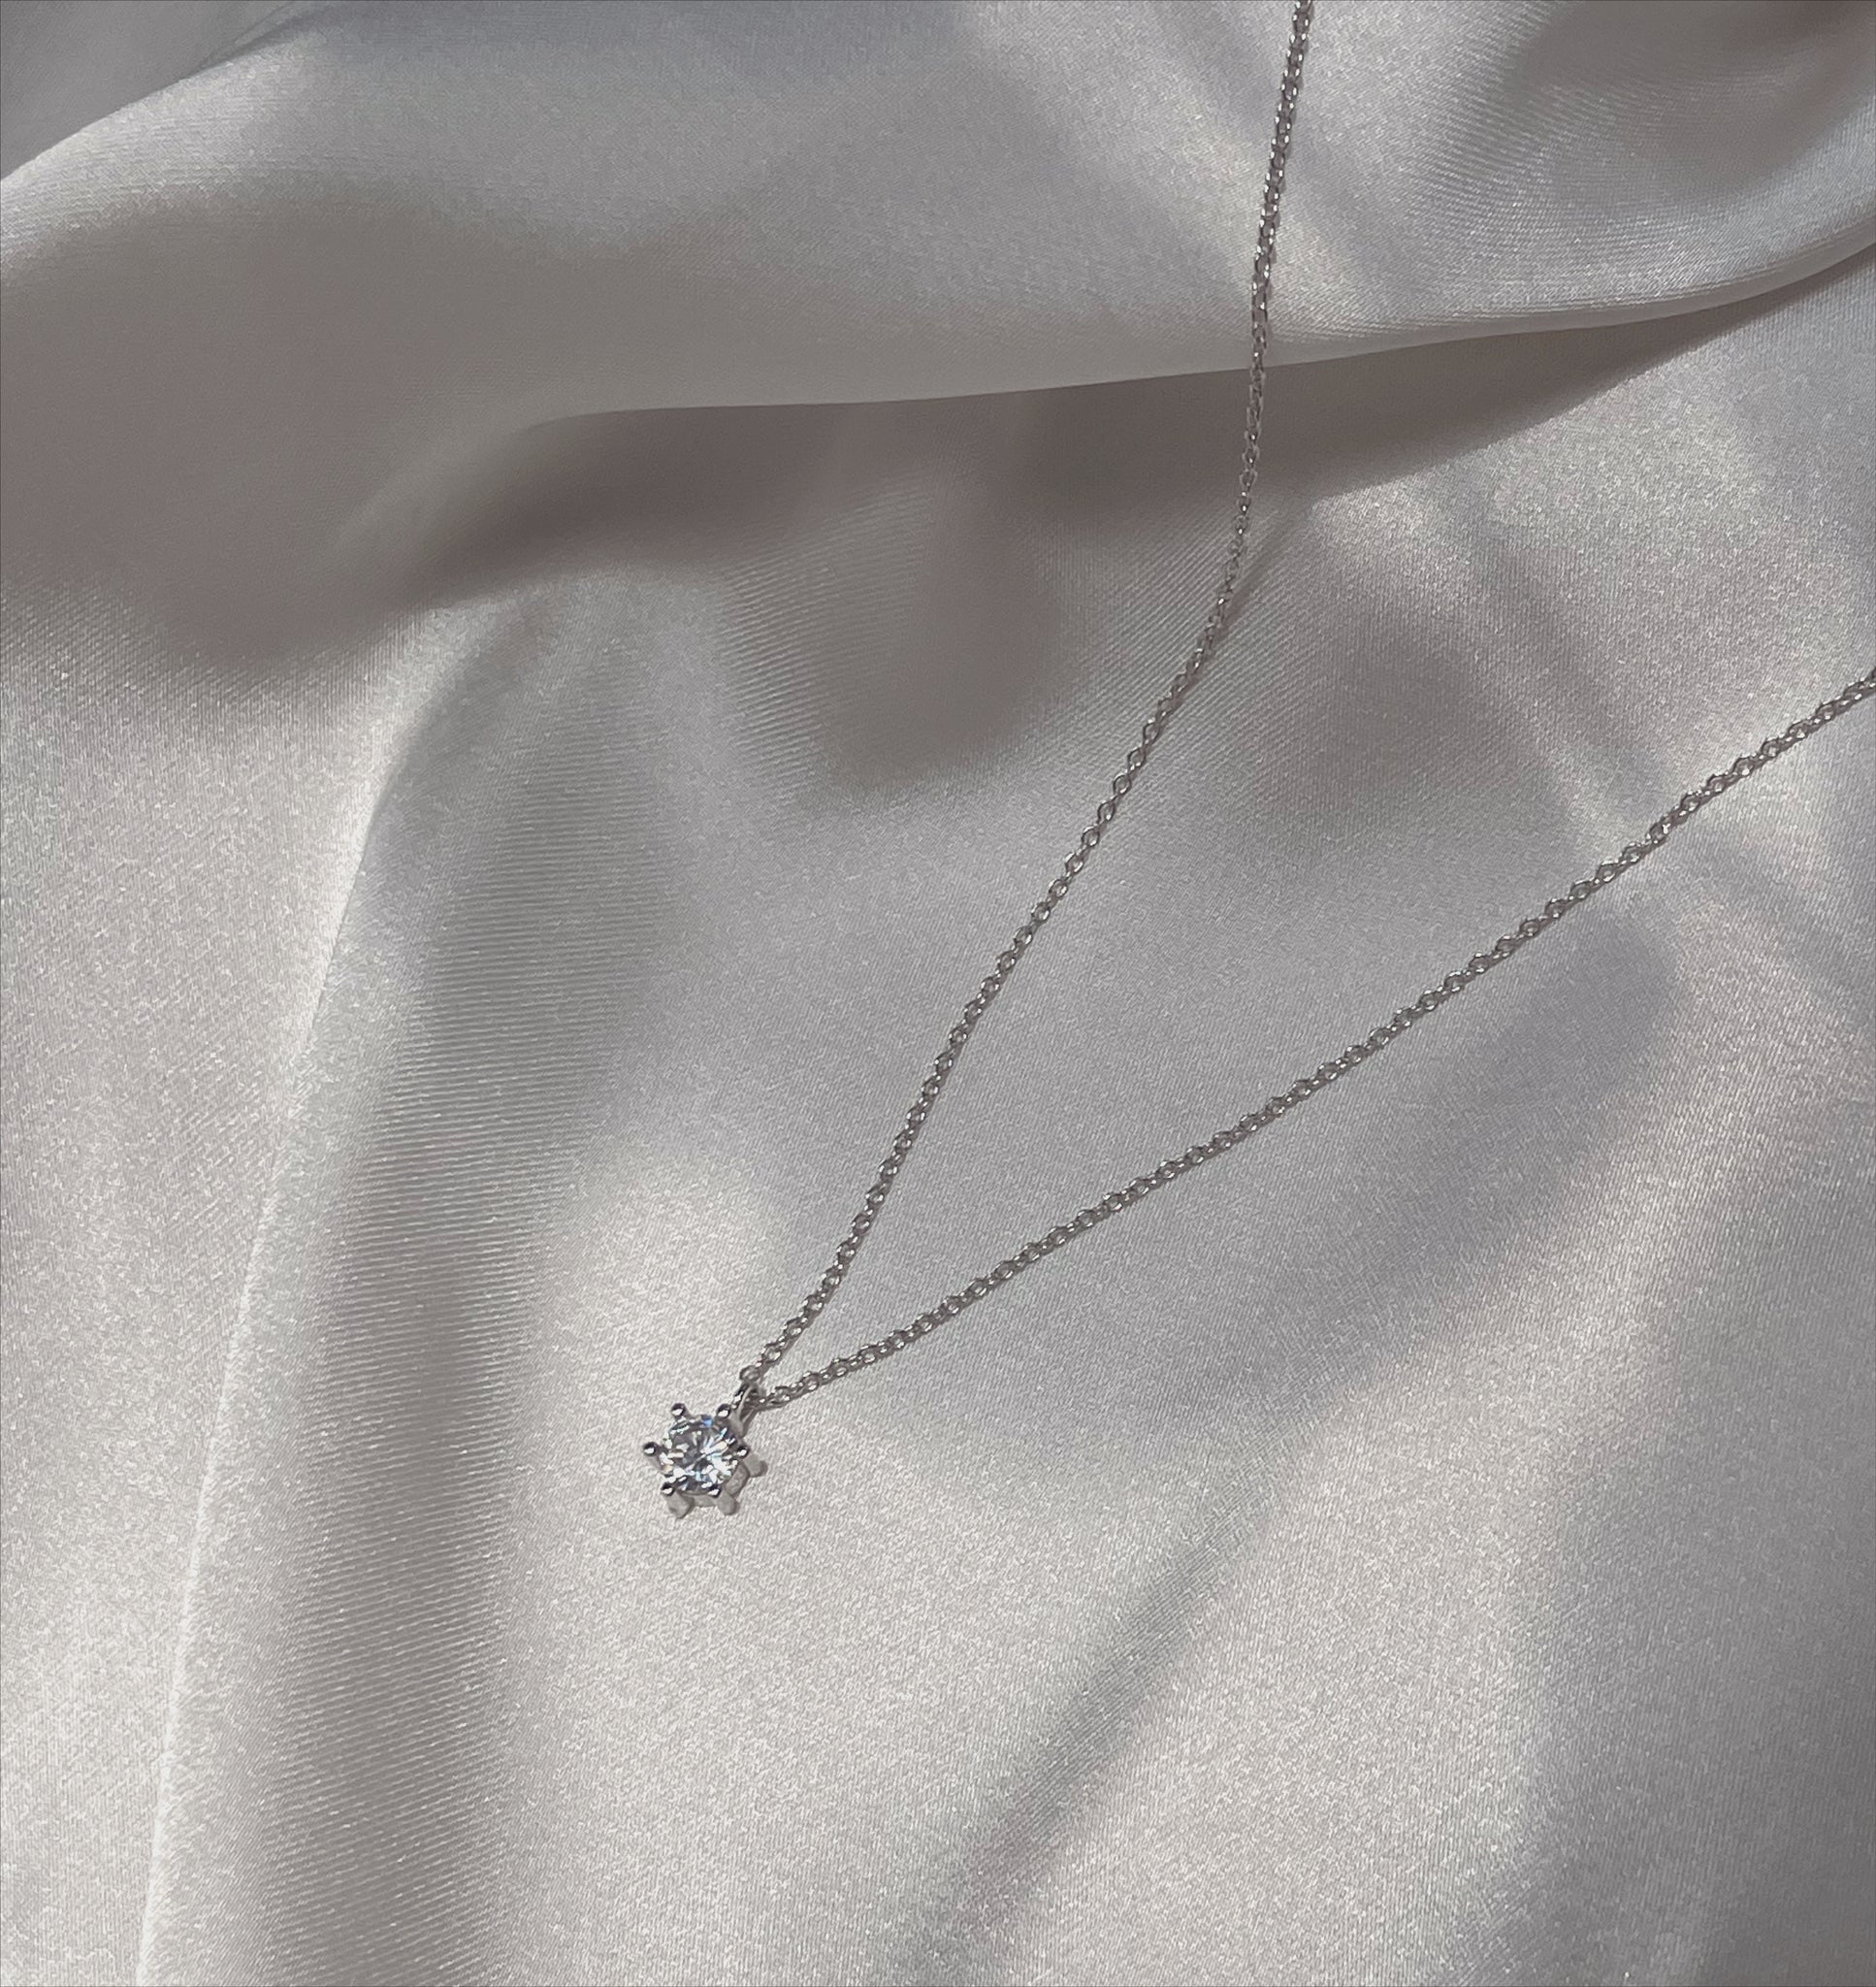 PARIS | Tarnish Free | S925 Sterling Silver I 18ct gold plated I Cubic Zirconia I Pendant Necklace/Bracelet